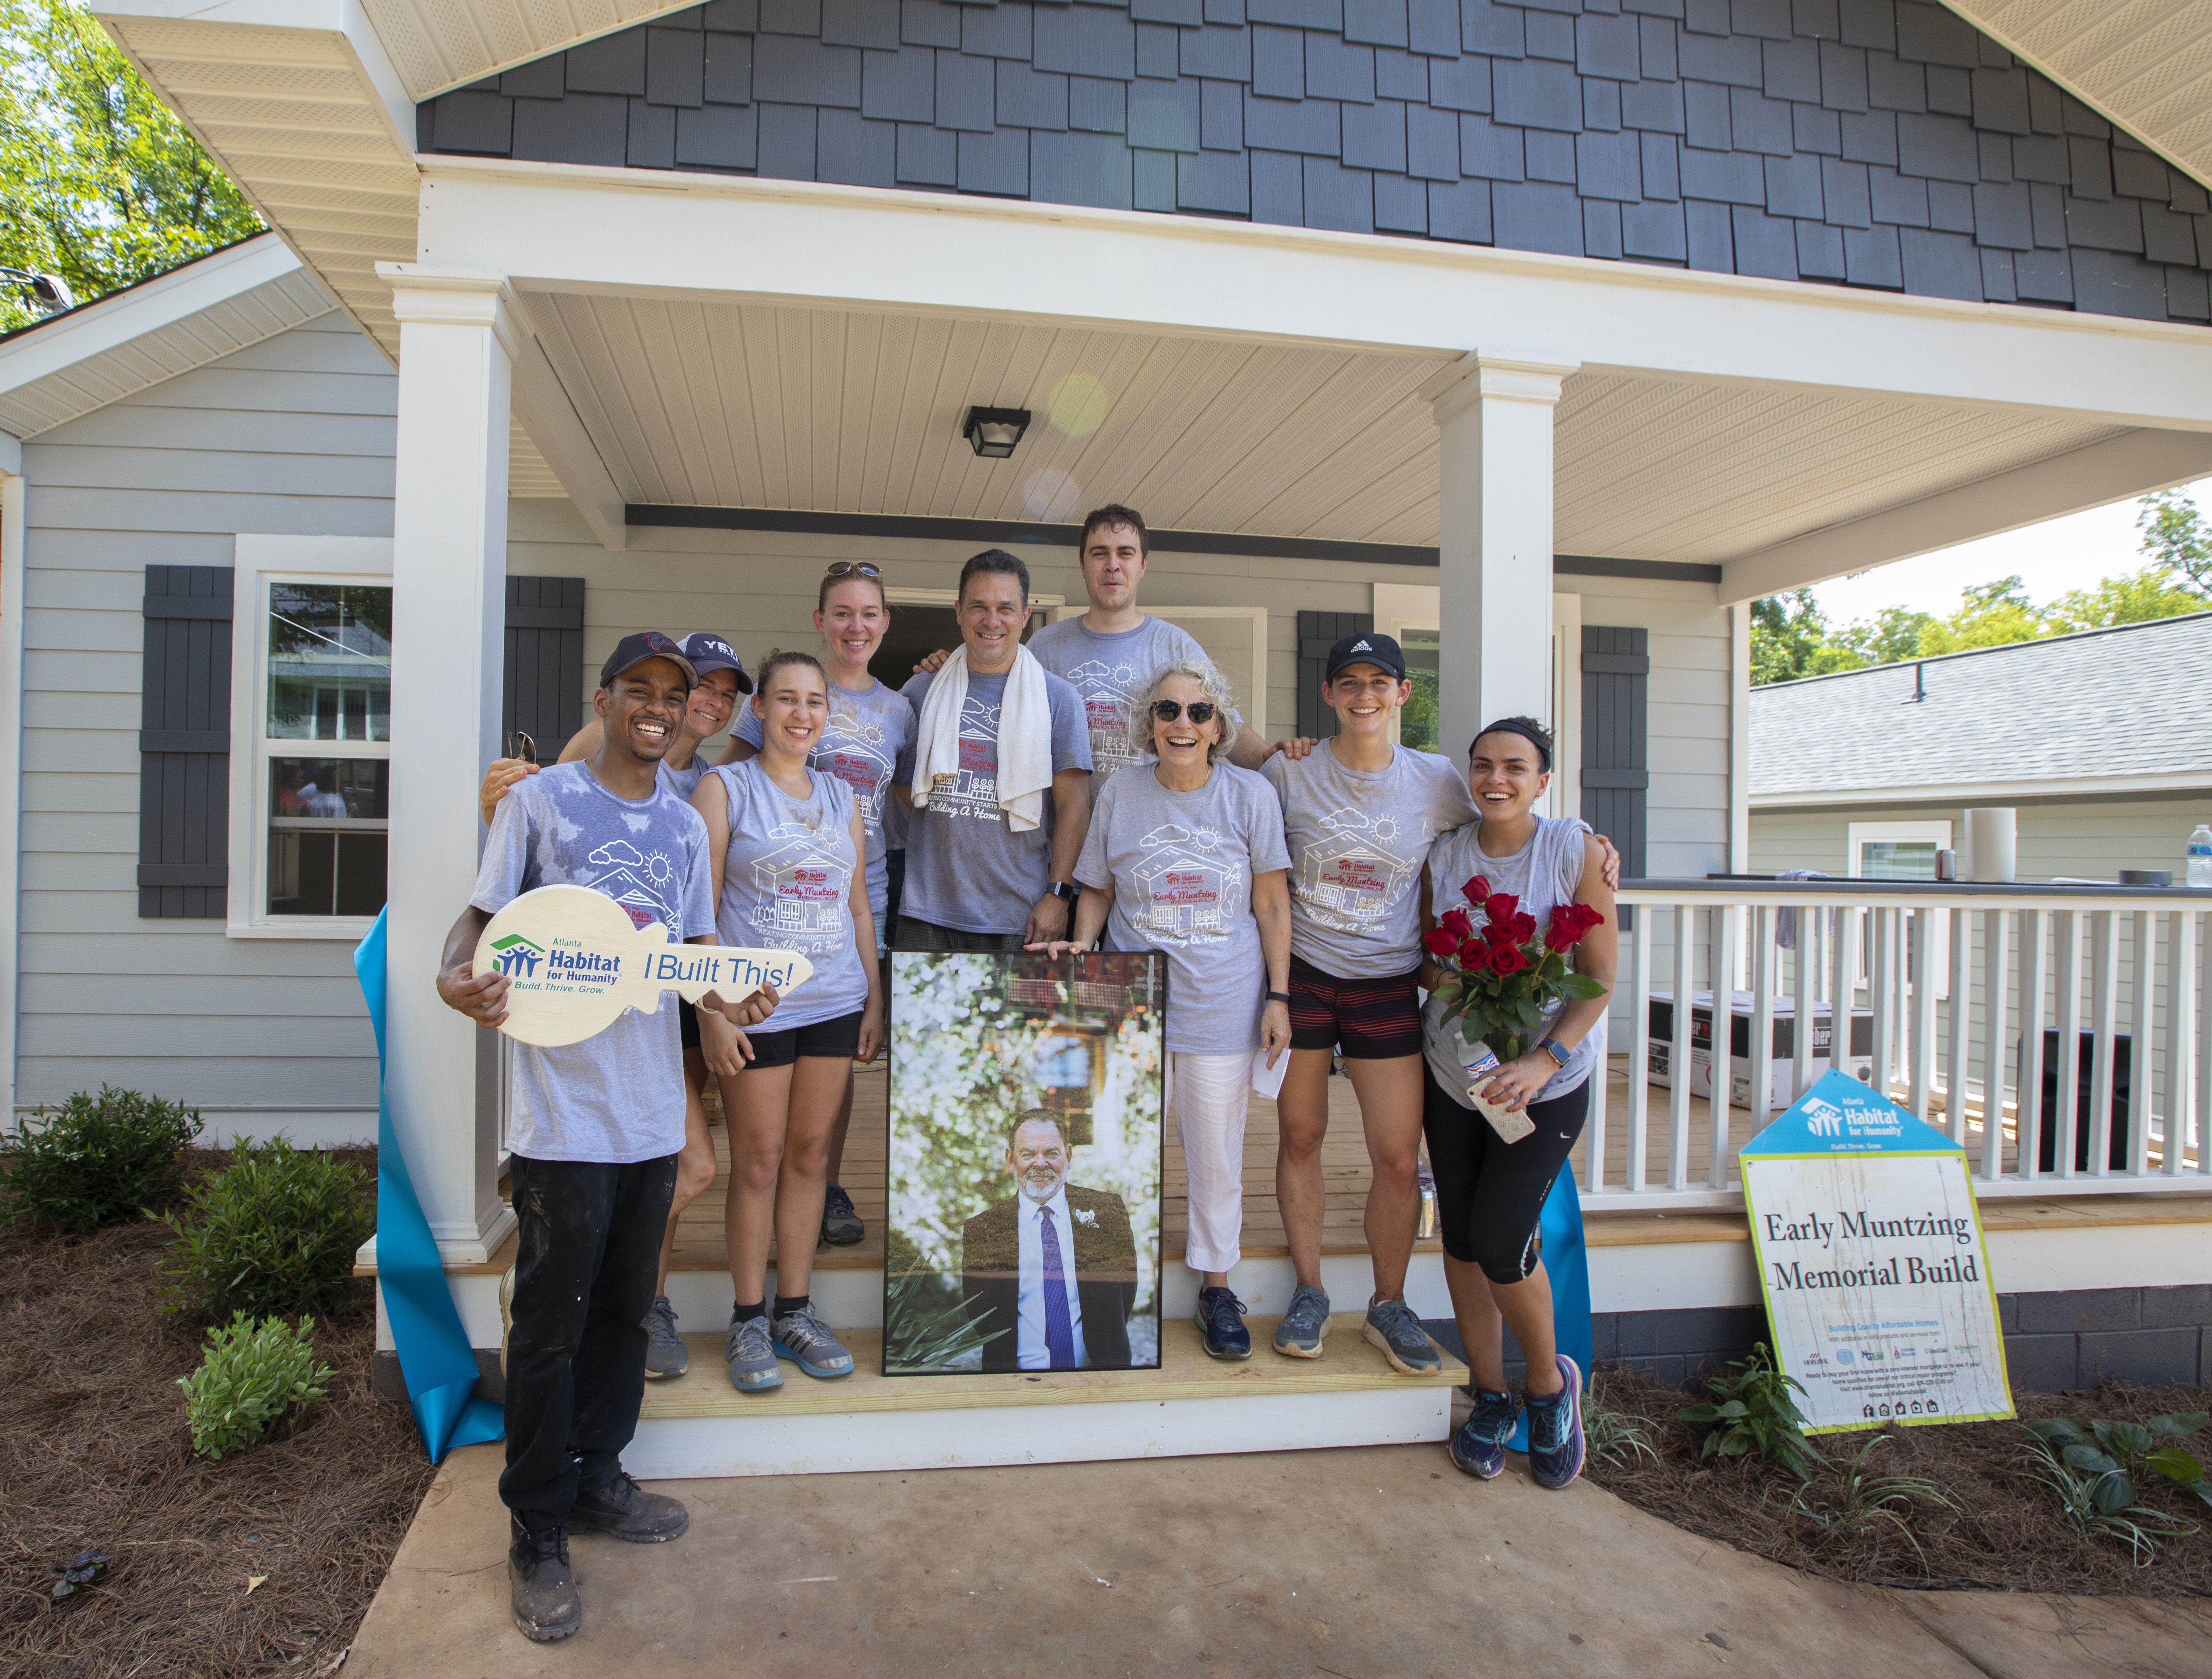 Read more about the article Atlanta Habitat Home Built in Honor of Longtime Supporter, Ernest ‘Early’ Muntzing